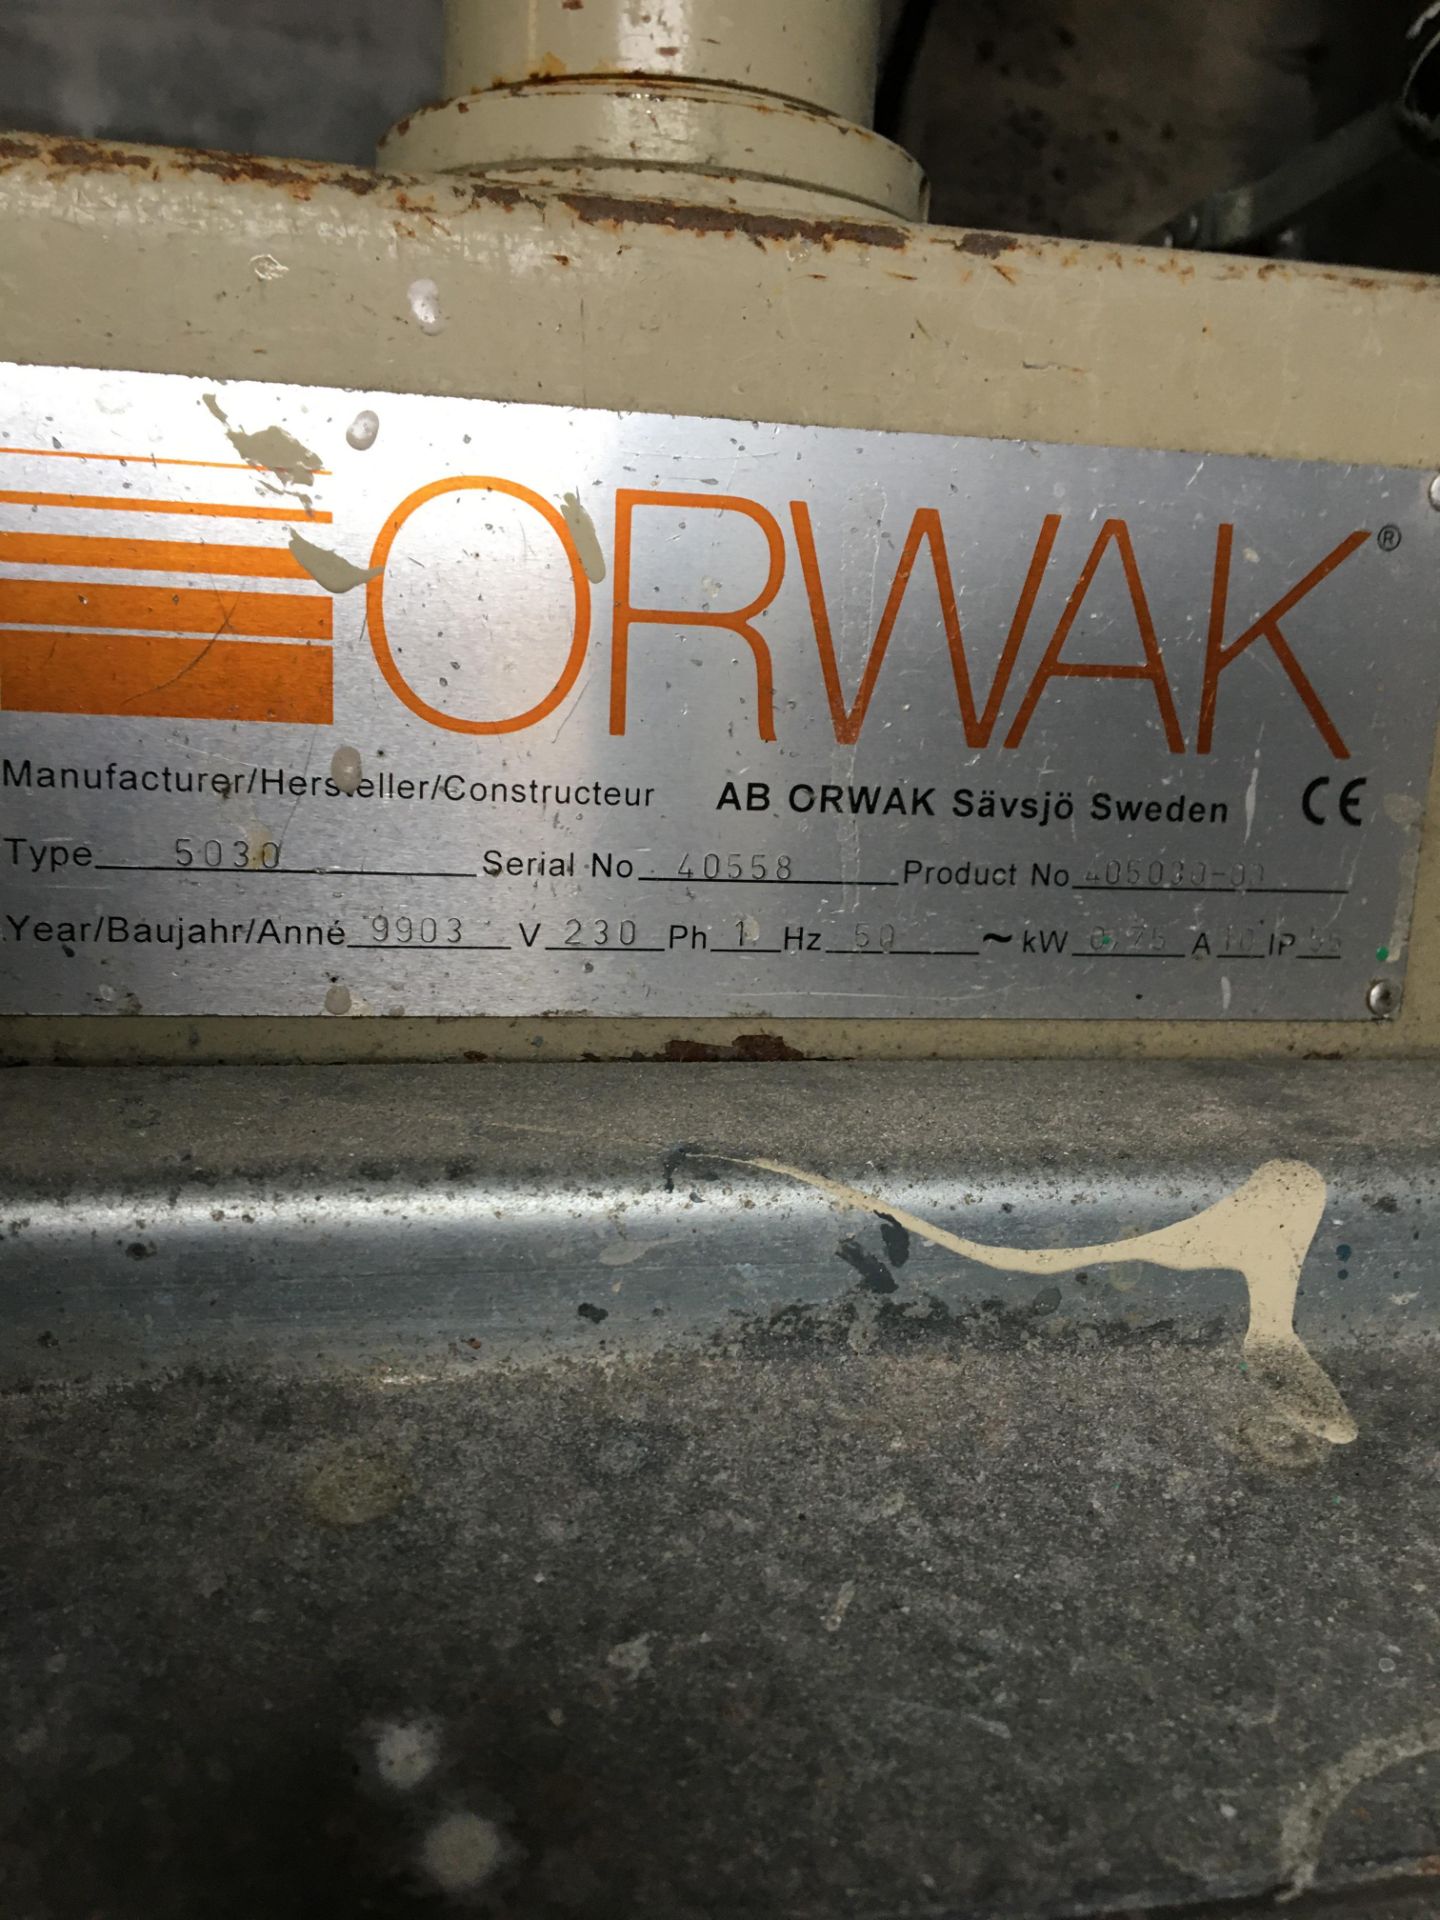 Orwak Type: 5030 waste tin / can compactor, Serial No. 40558 (Location: Two Gates) - Image 2 of 2